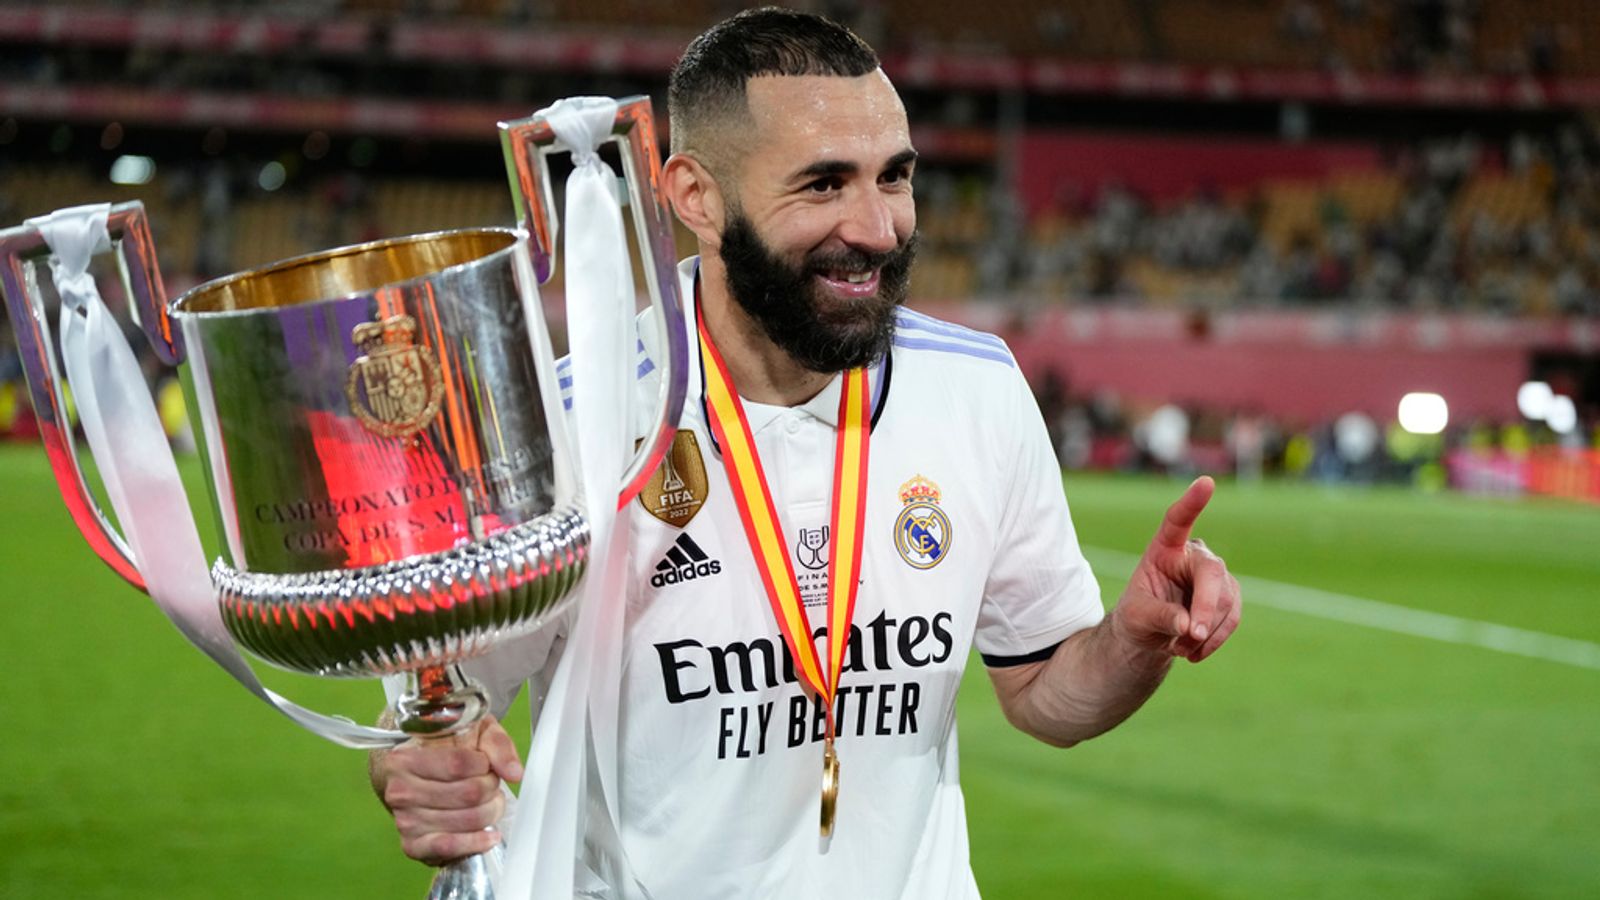 Karim Benzema will leave Real Madrid after 14 years at the Spanish club, World News